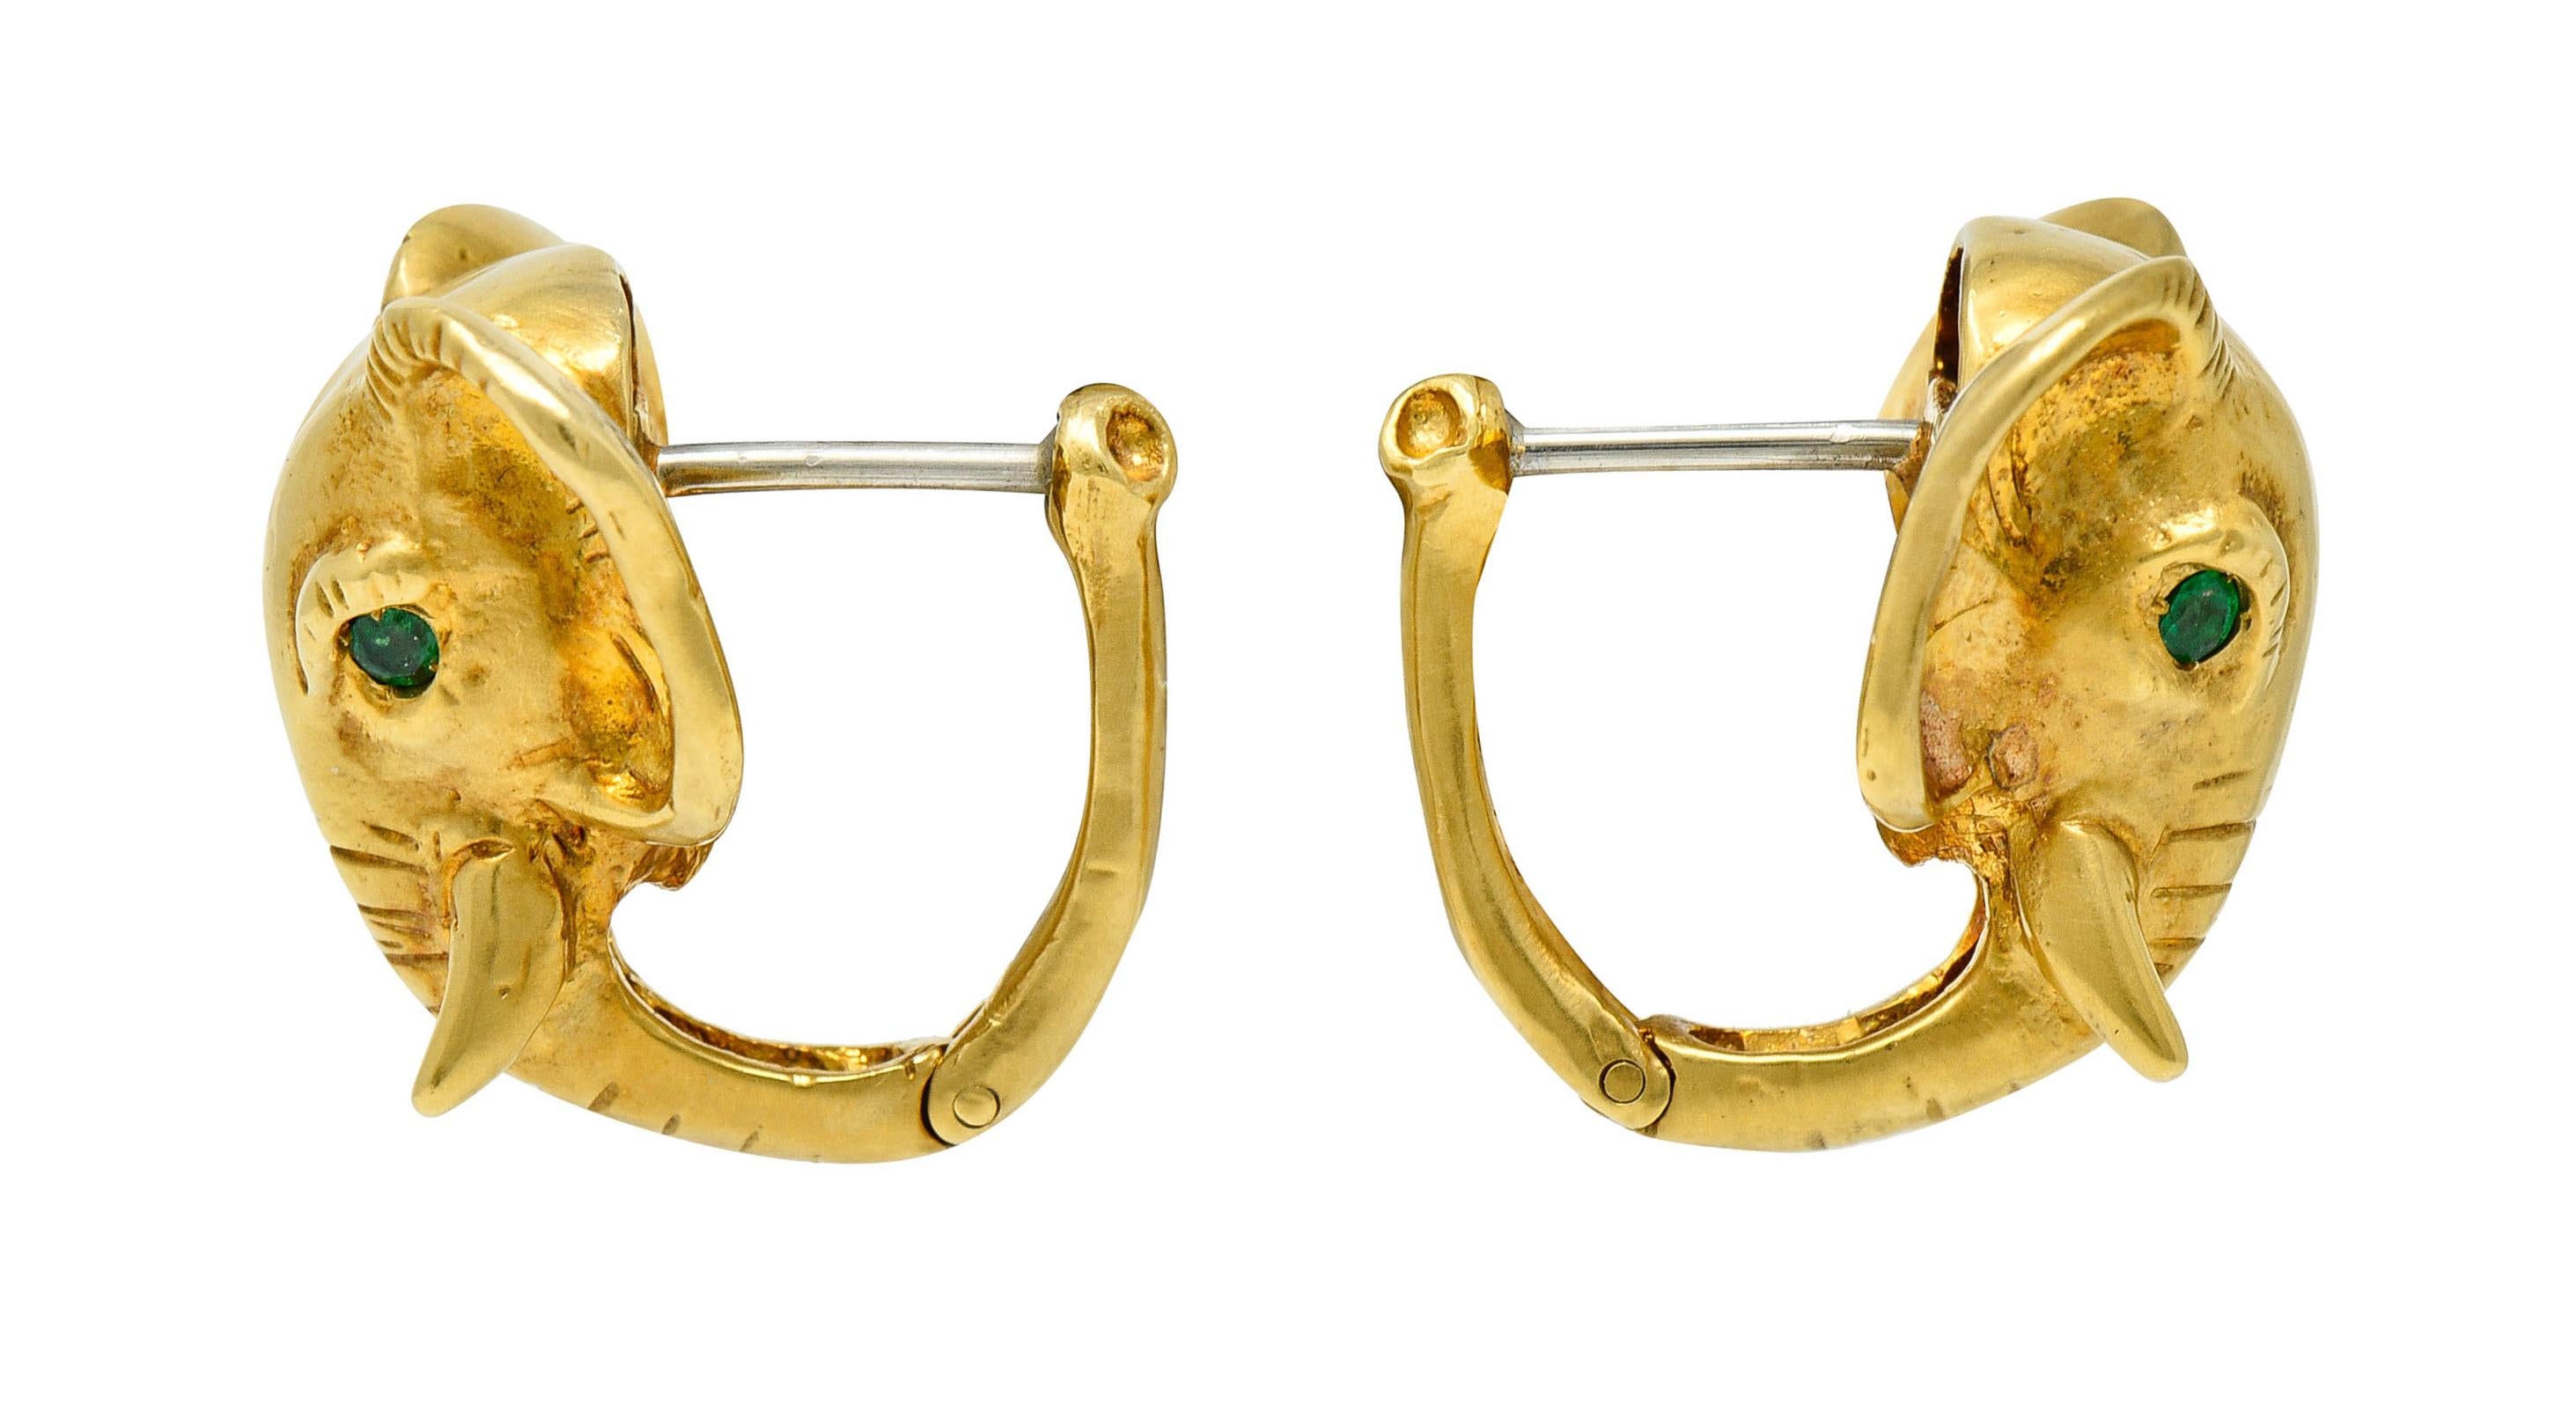 Hoop style earrings are designed as highly rendered African elephants

With deep wrinkle details and a fine juxtaposition between a high polish and a satin finish

Eyes are bright green round cut emeralds weighing in total approximately 0.20